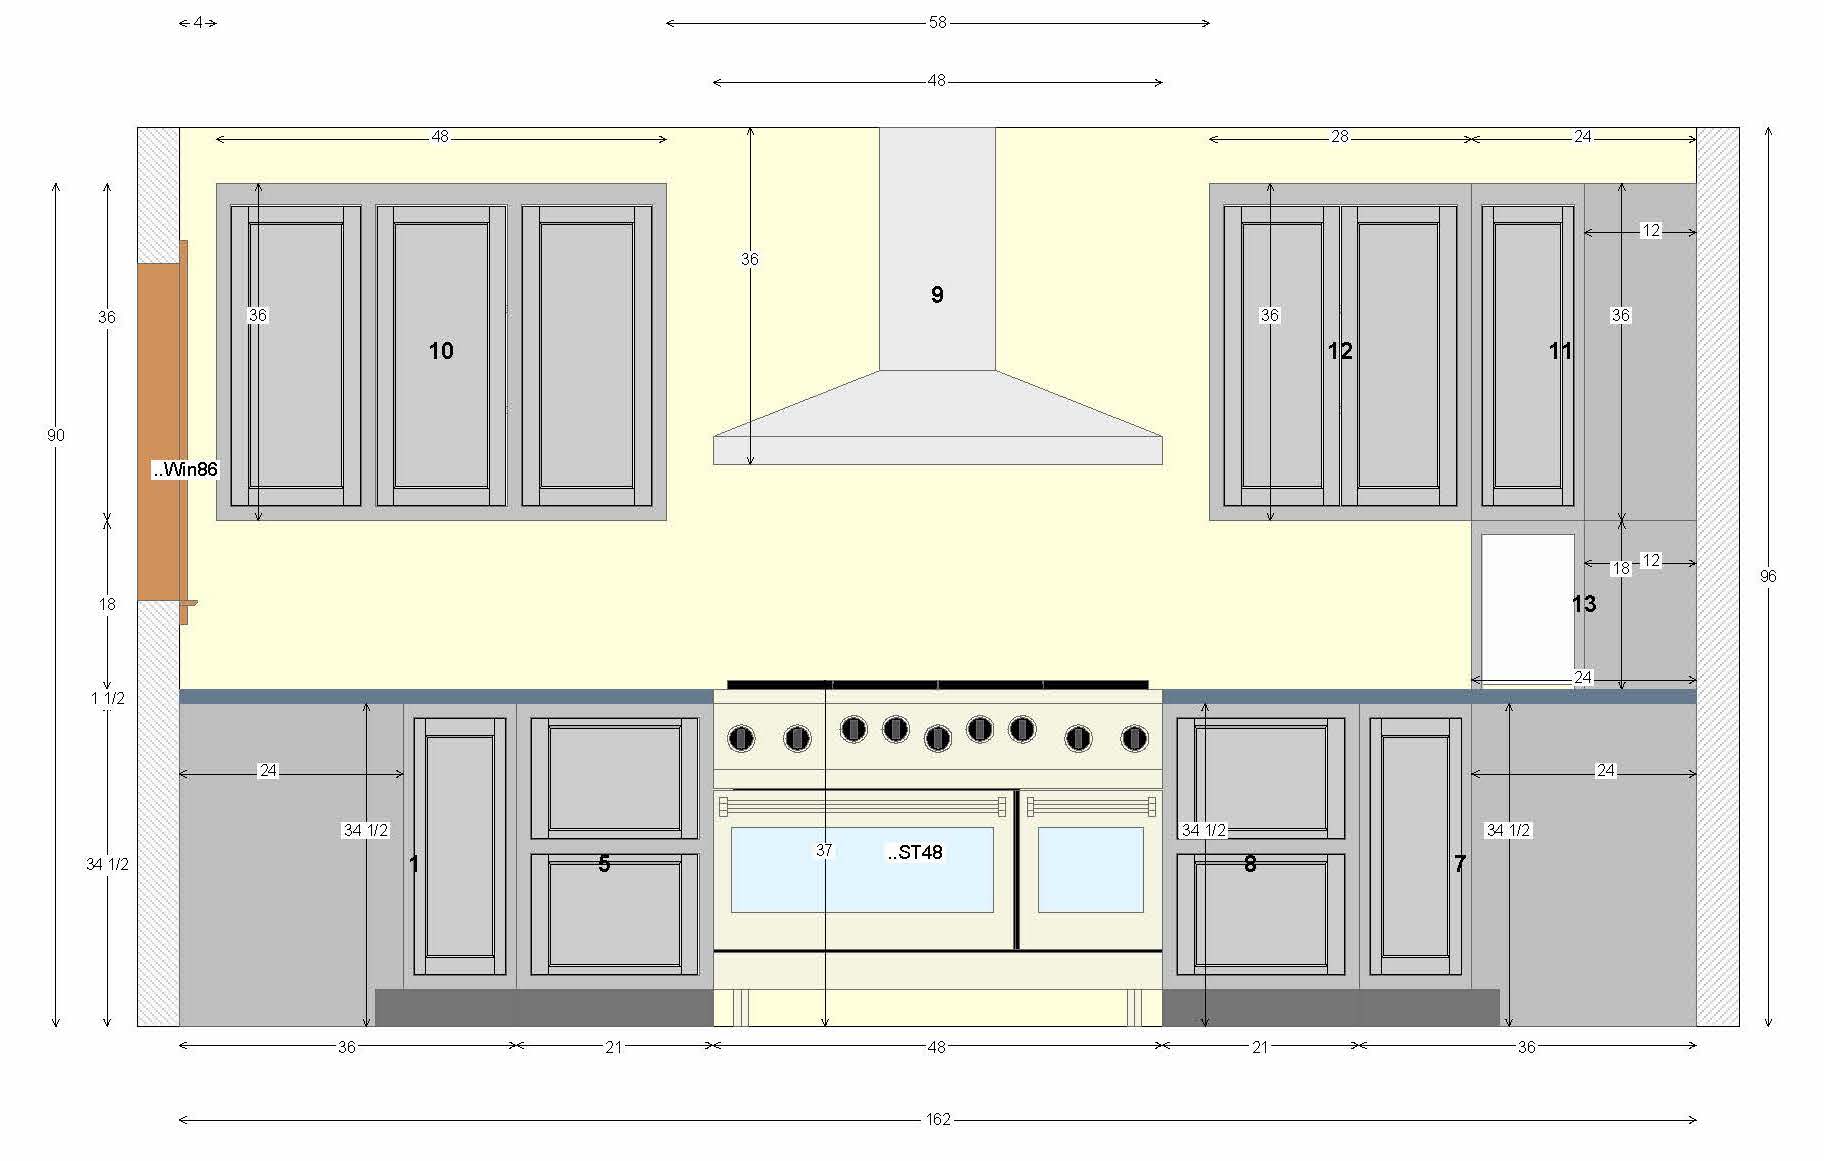 The center wall in an U-shaped kitchen layout design.